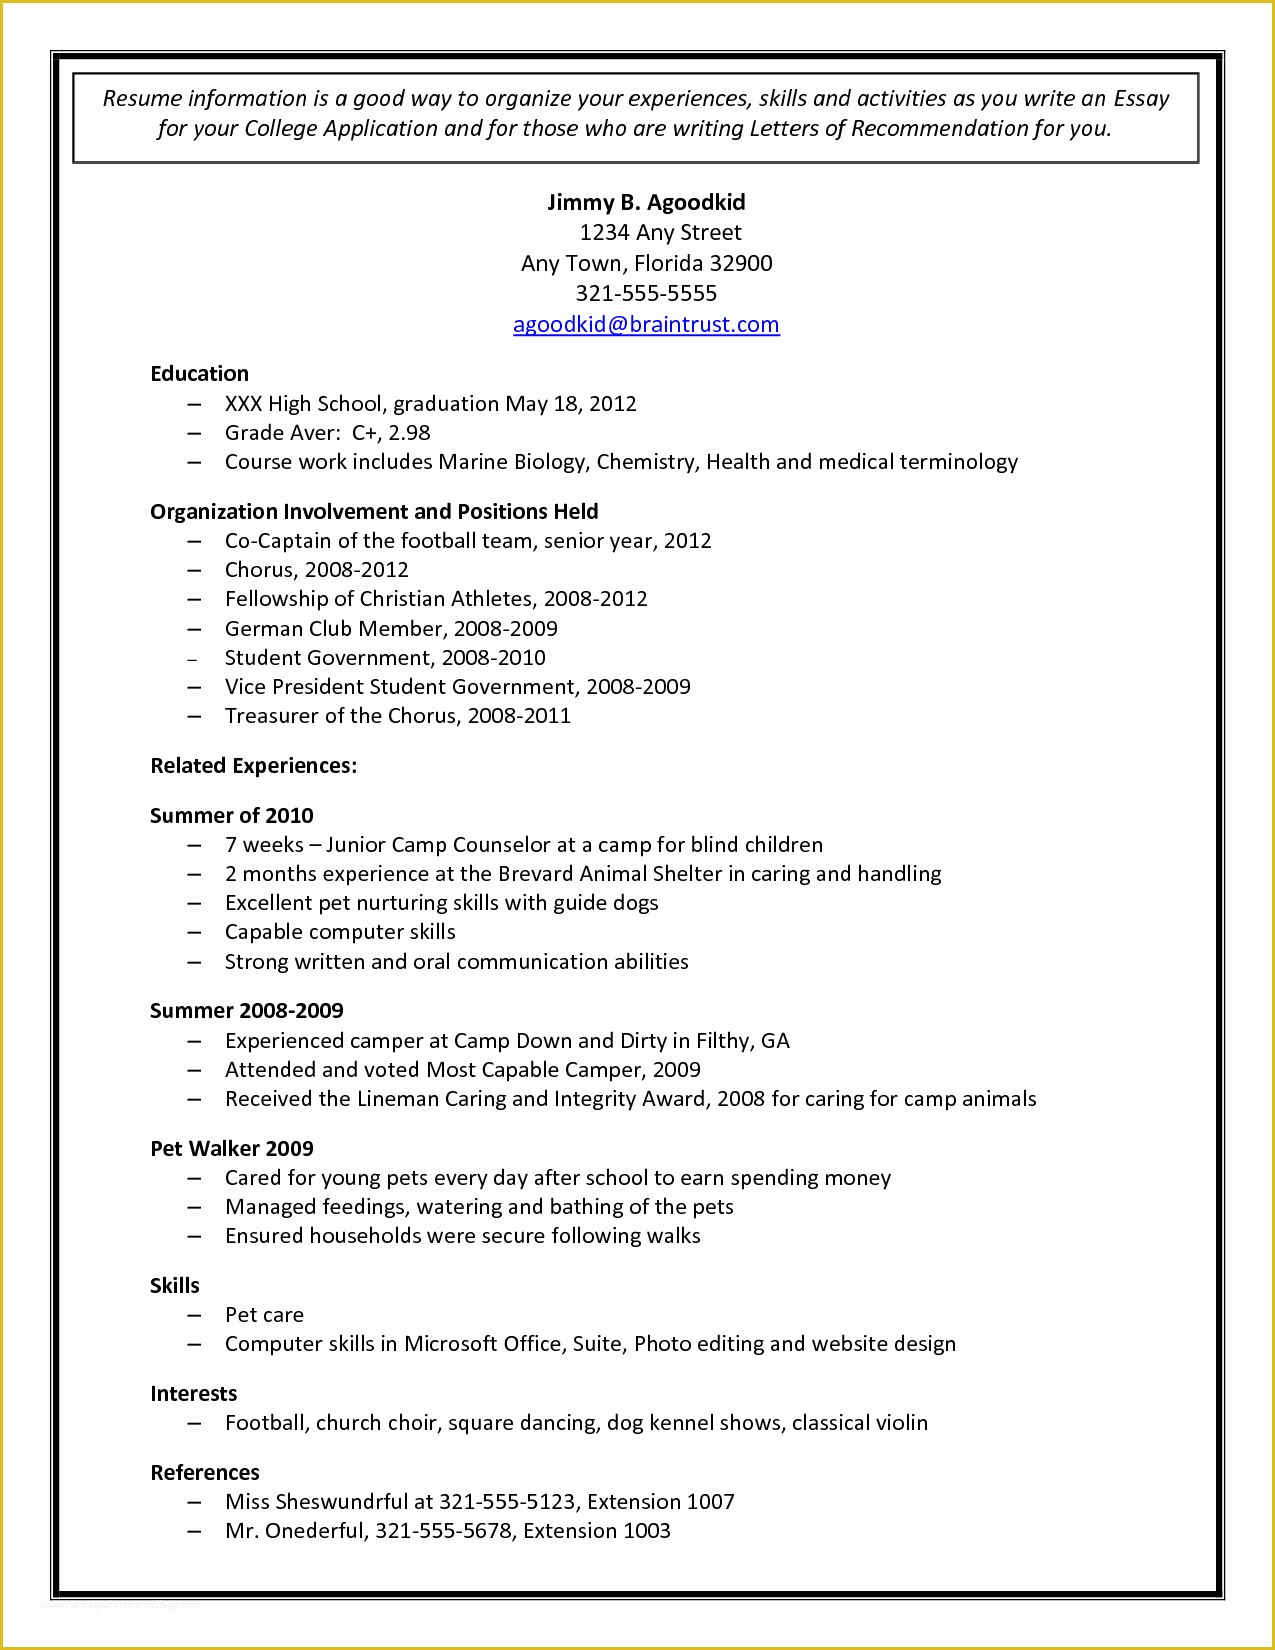 sample resume objective college admissions application